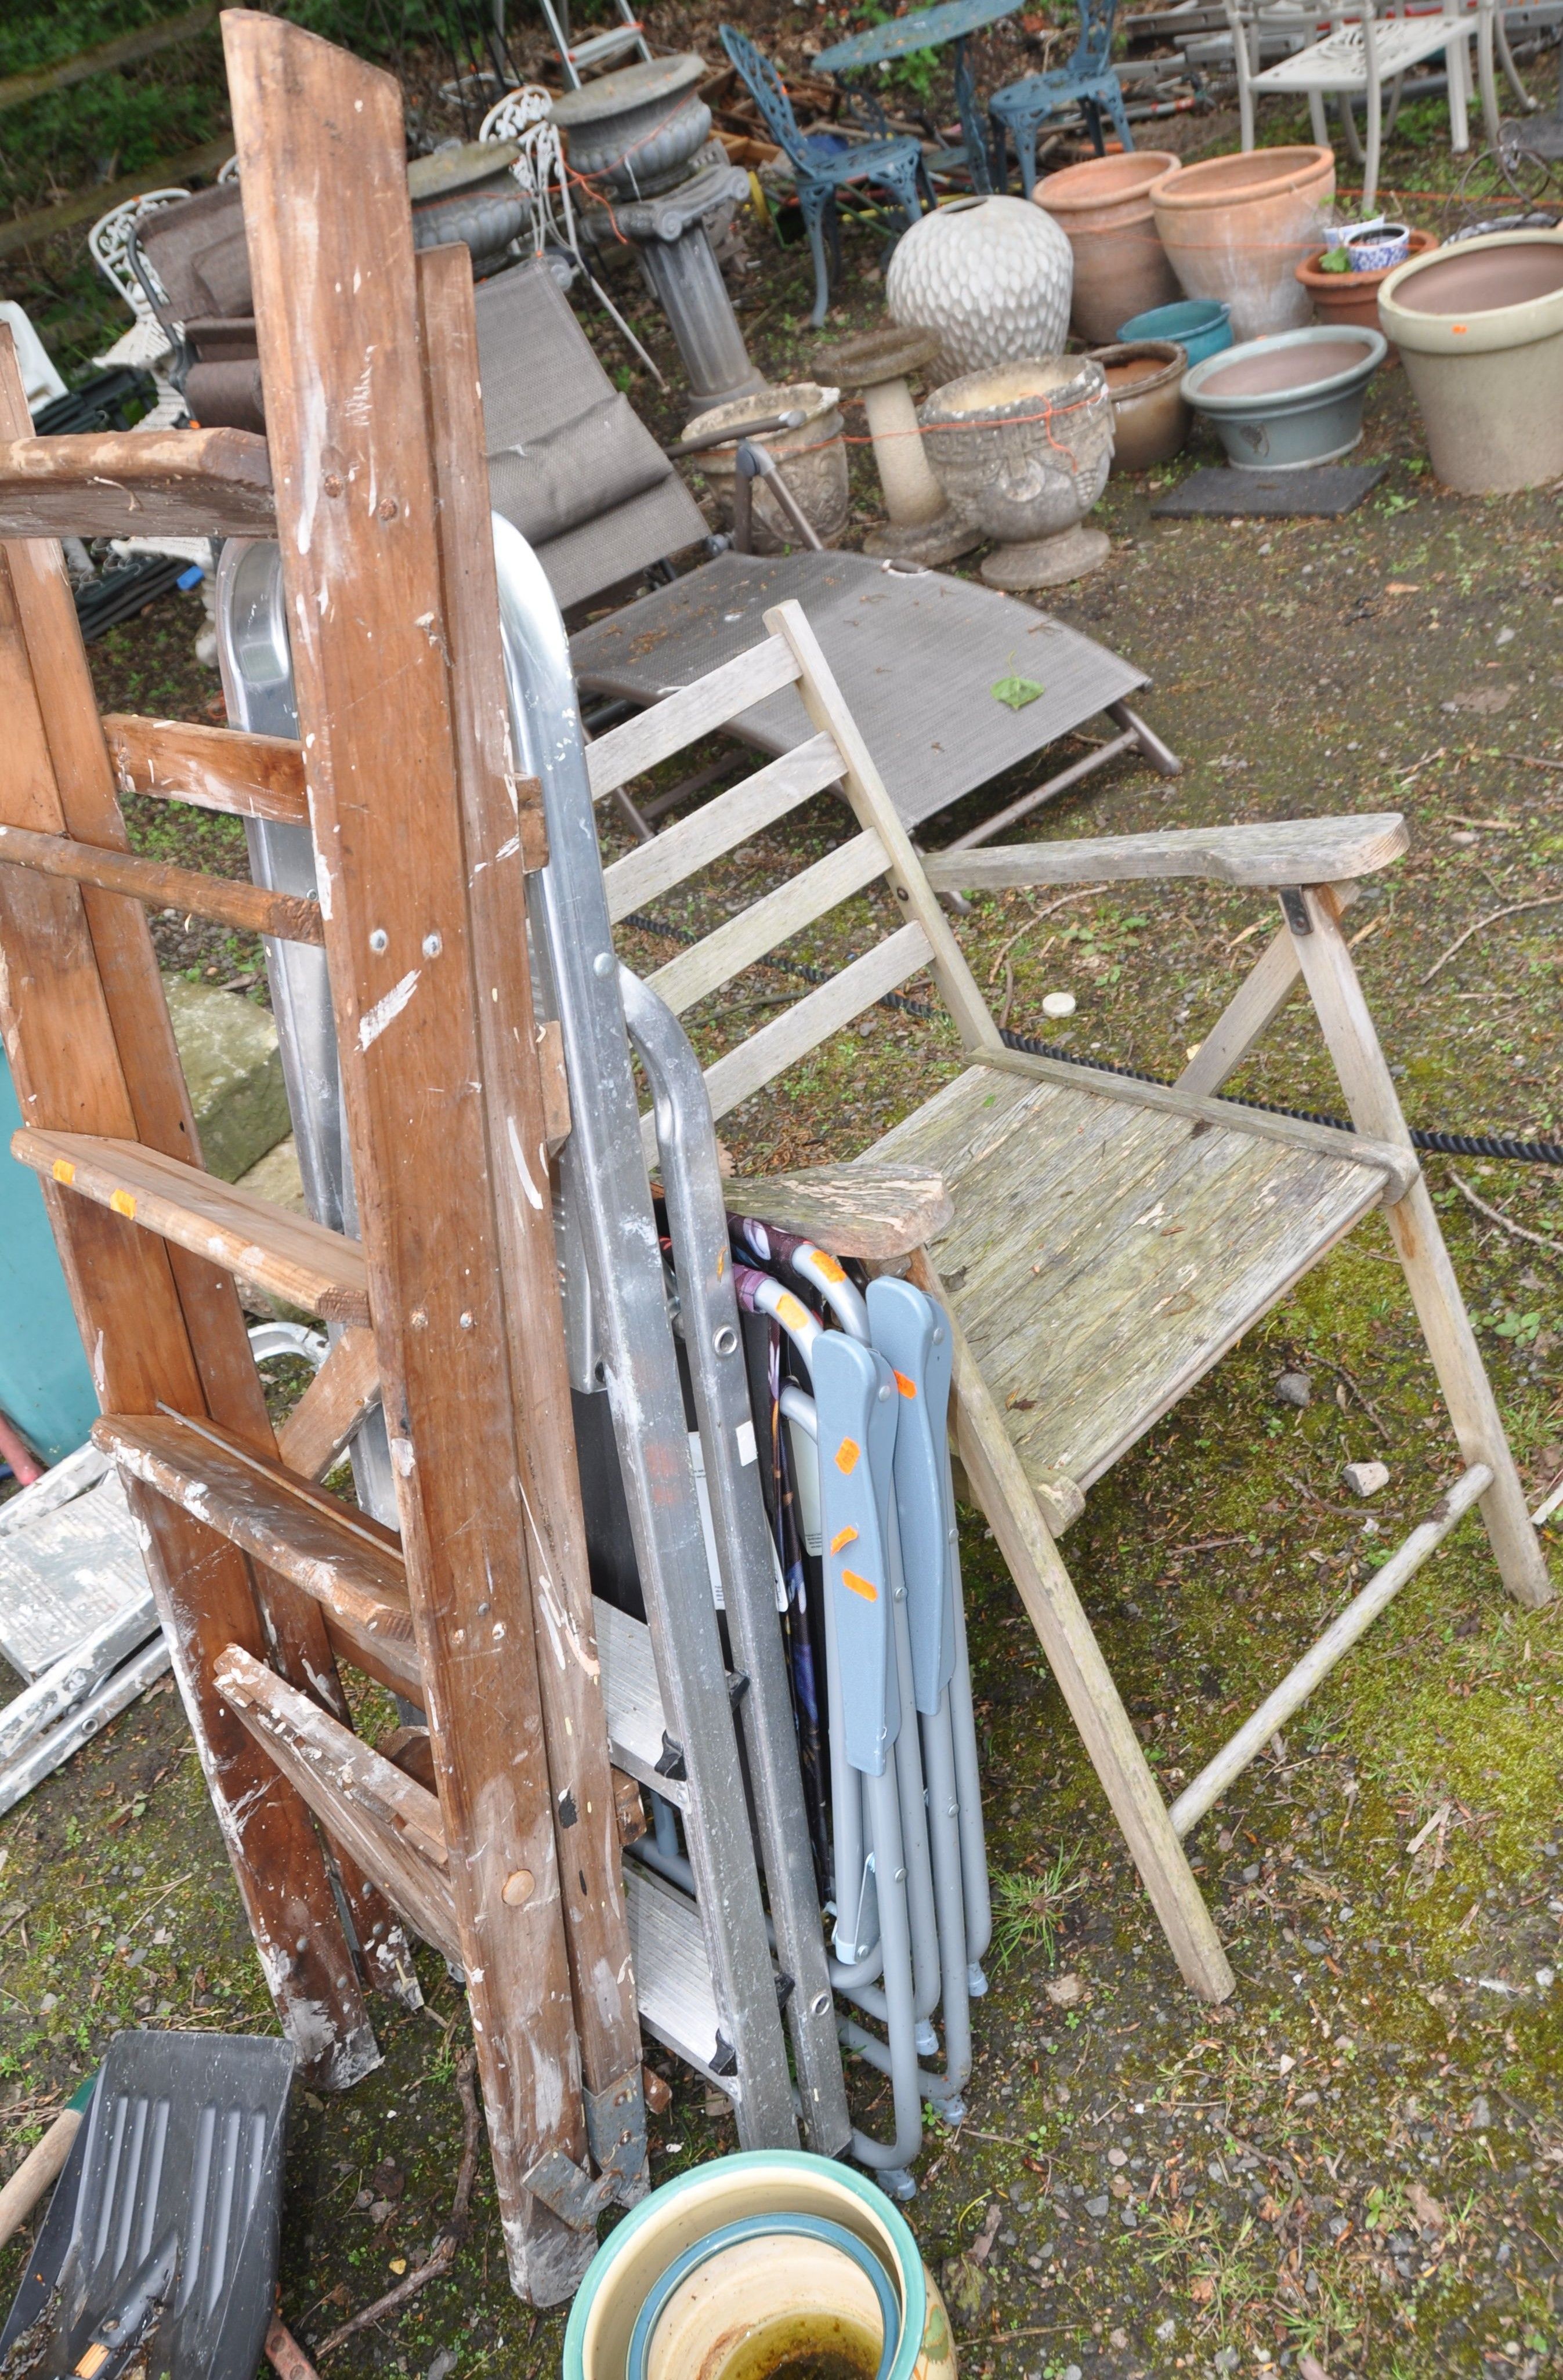 A COLLECTION OF GARDEN TOOLS AND STEP LADDERS including a garden trolley, pots, folding chairs, - Image 3 of 3